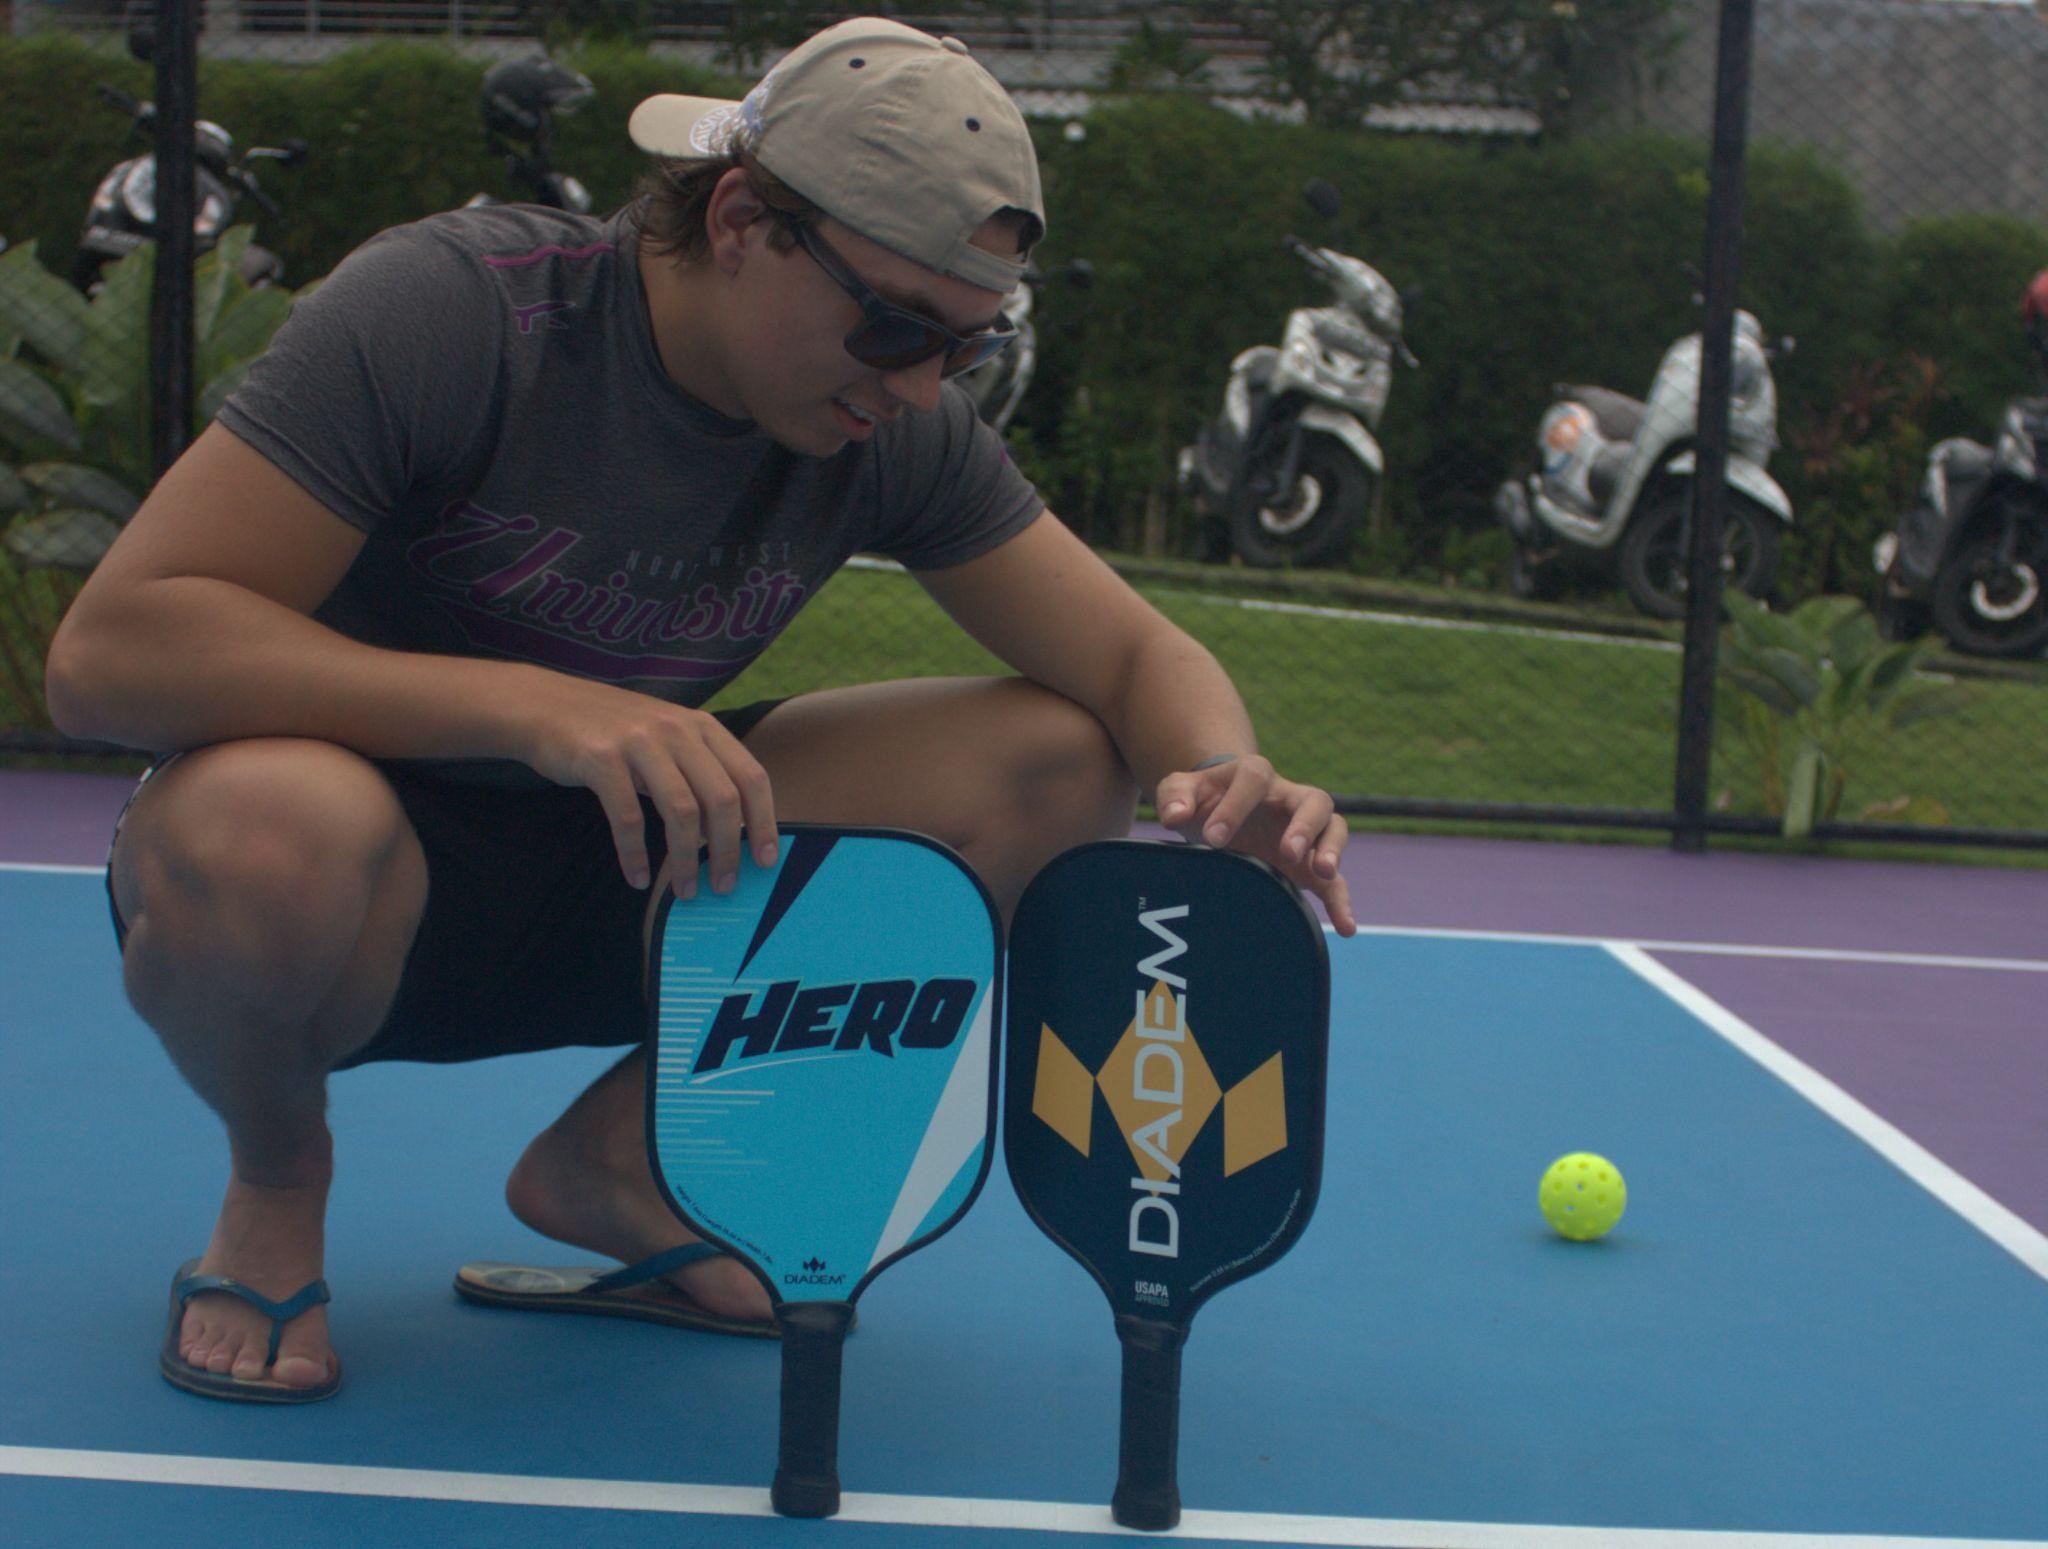 Why I love pickleball by Francois published in Pickleball Patty